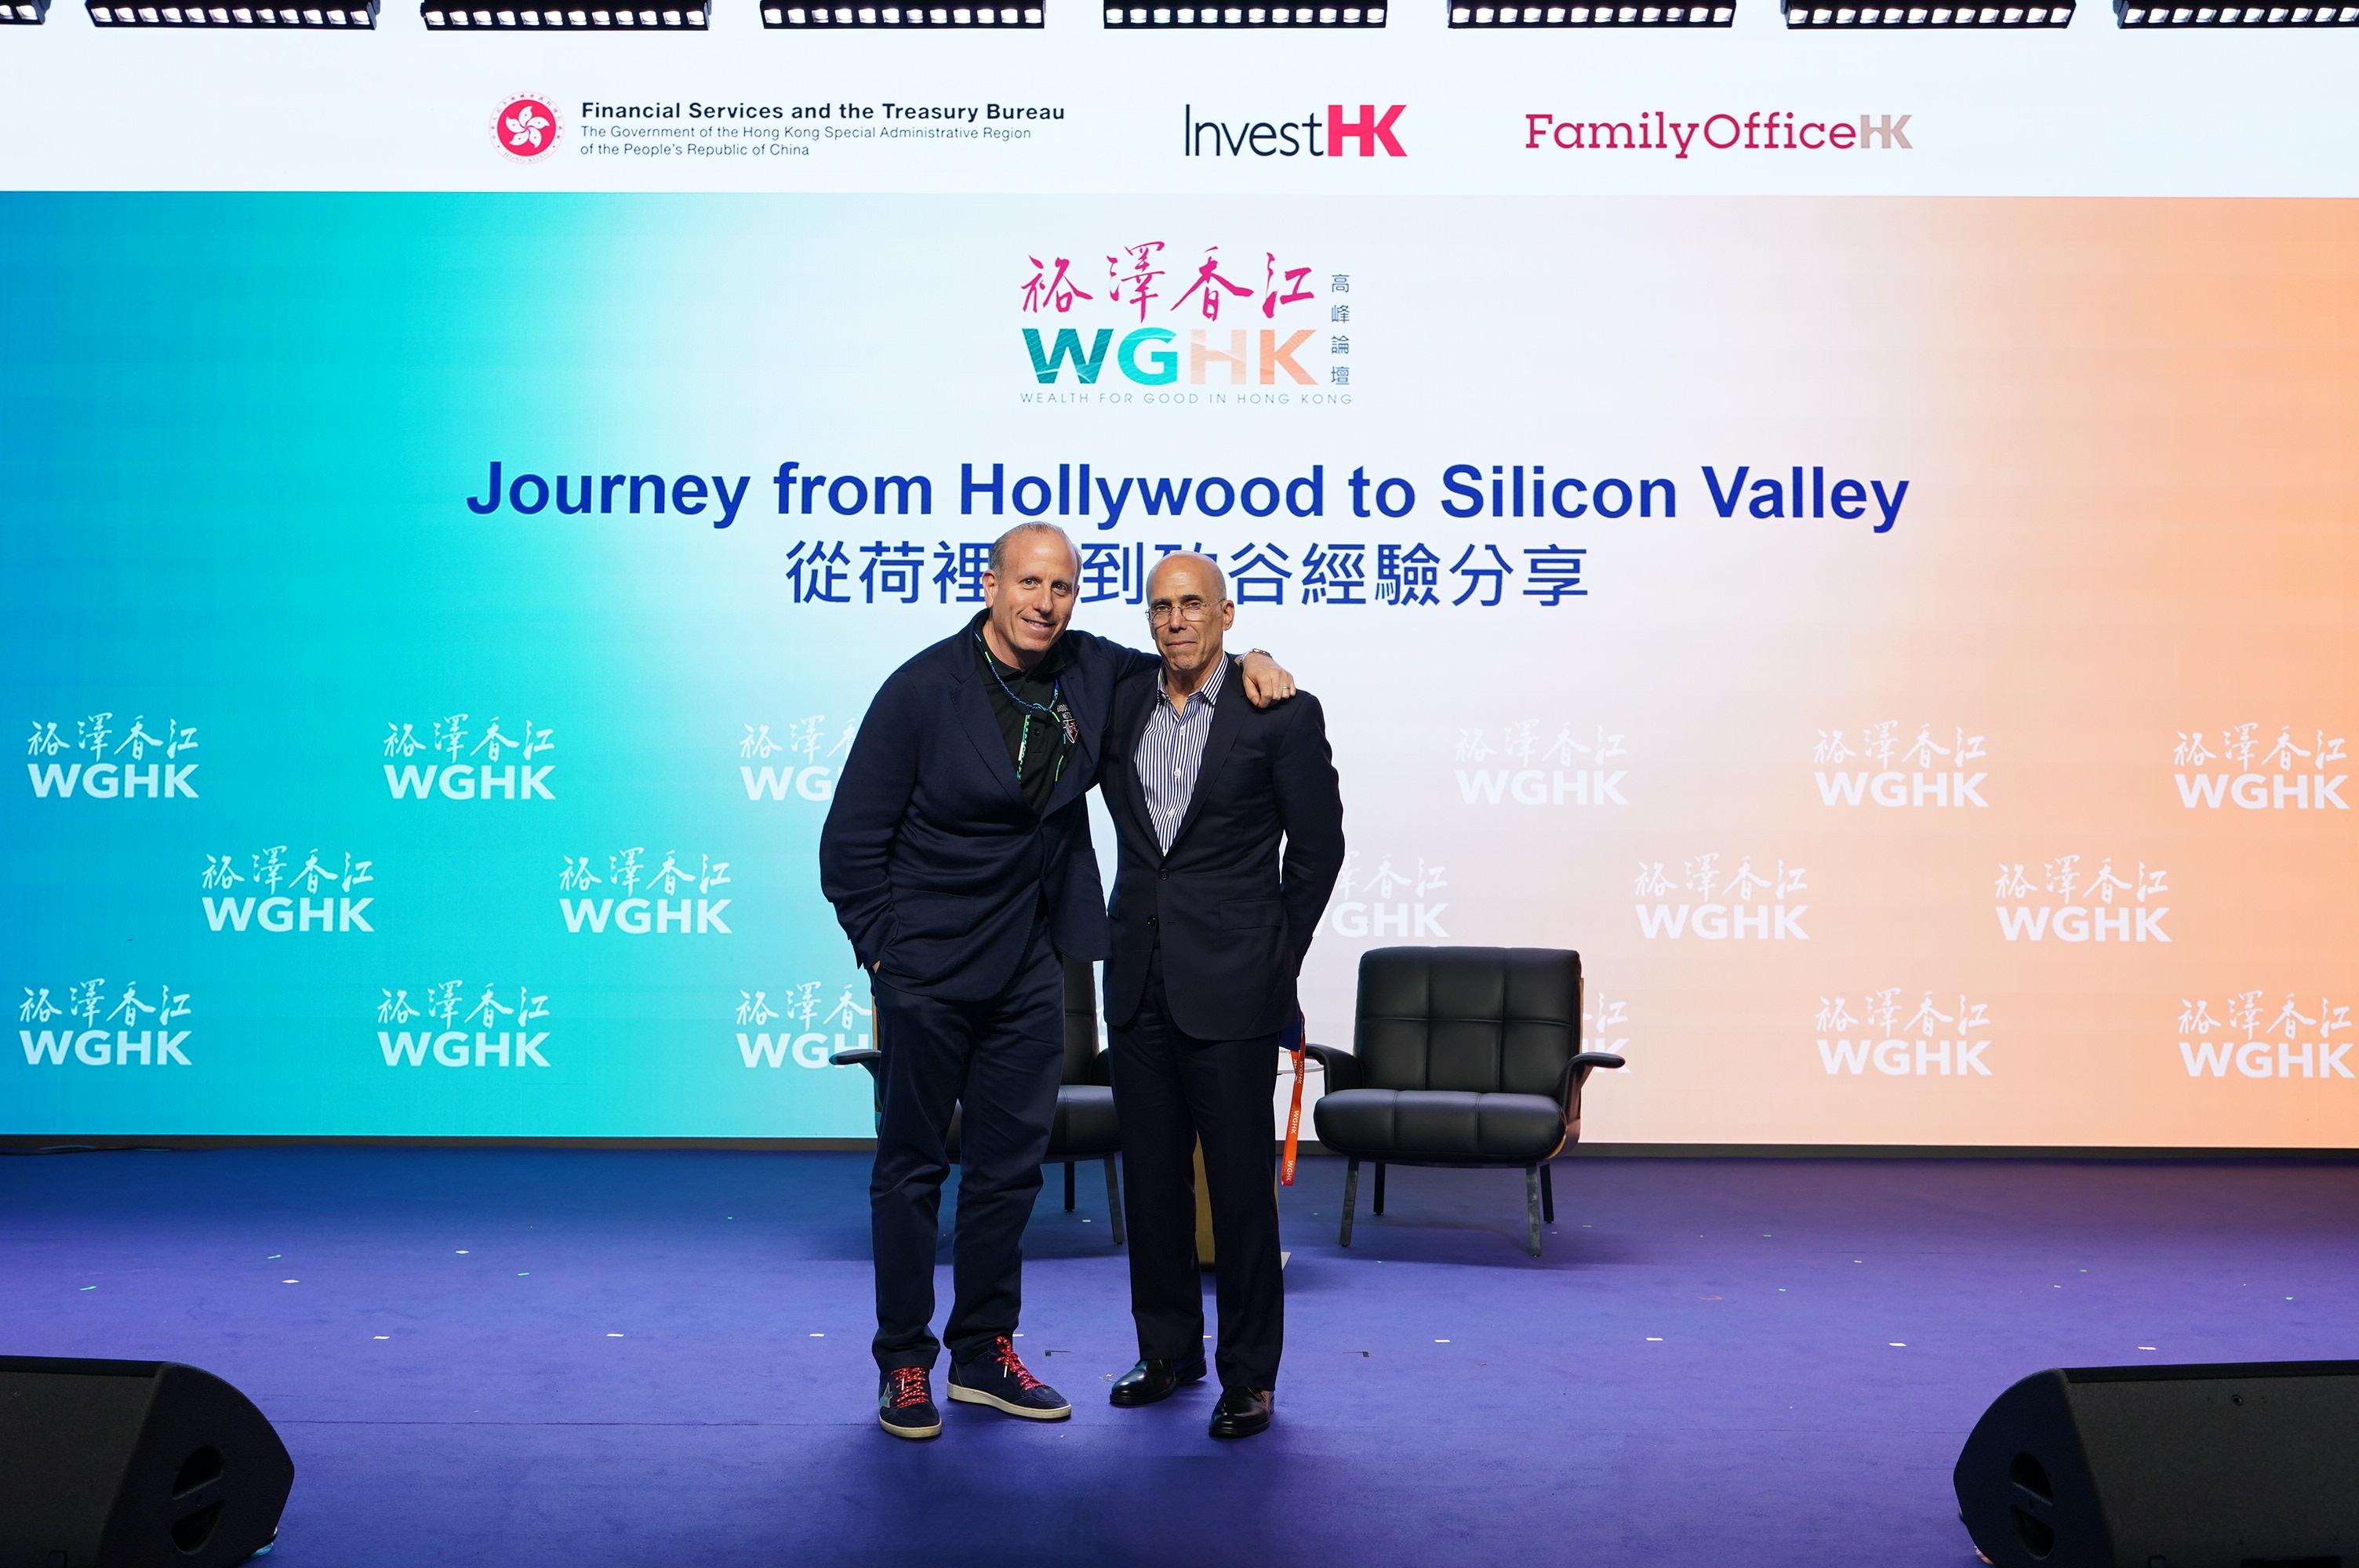 WndrCo's Founding Partner, Mr Jeffrey Katzenberg (right) had an insightful sharing during the Fireside Chat called "Journey from Hollywood to Silicon Valley", moderated by Chief Executive Officer, Blue Pool Capital, Mr Oliver Weisberg (left).